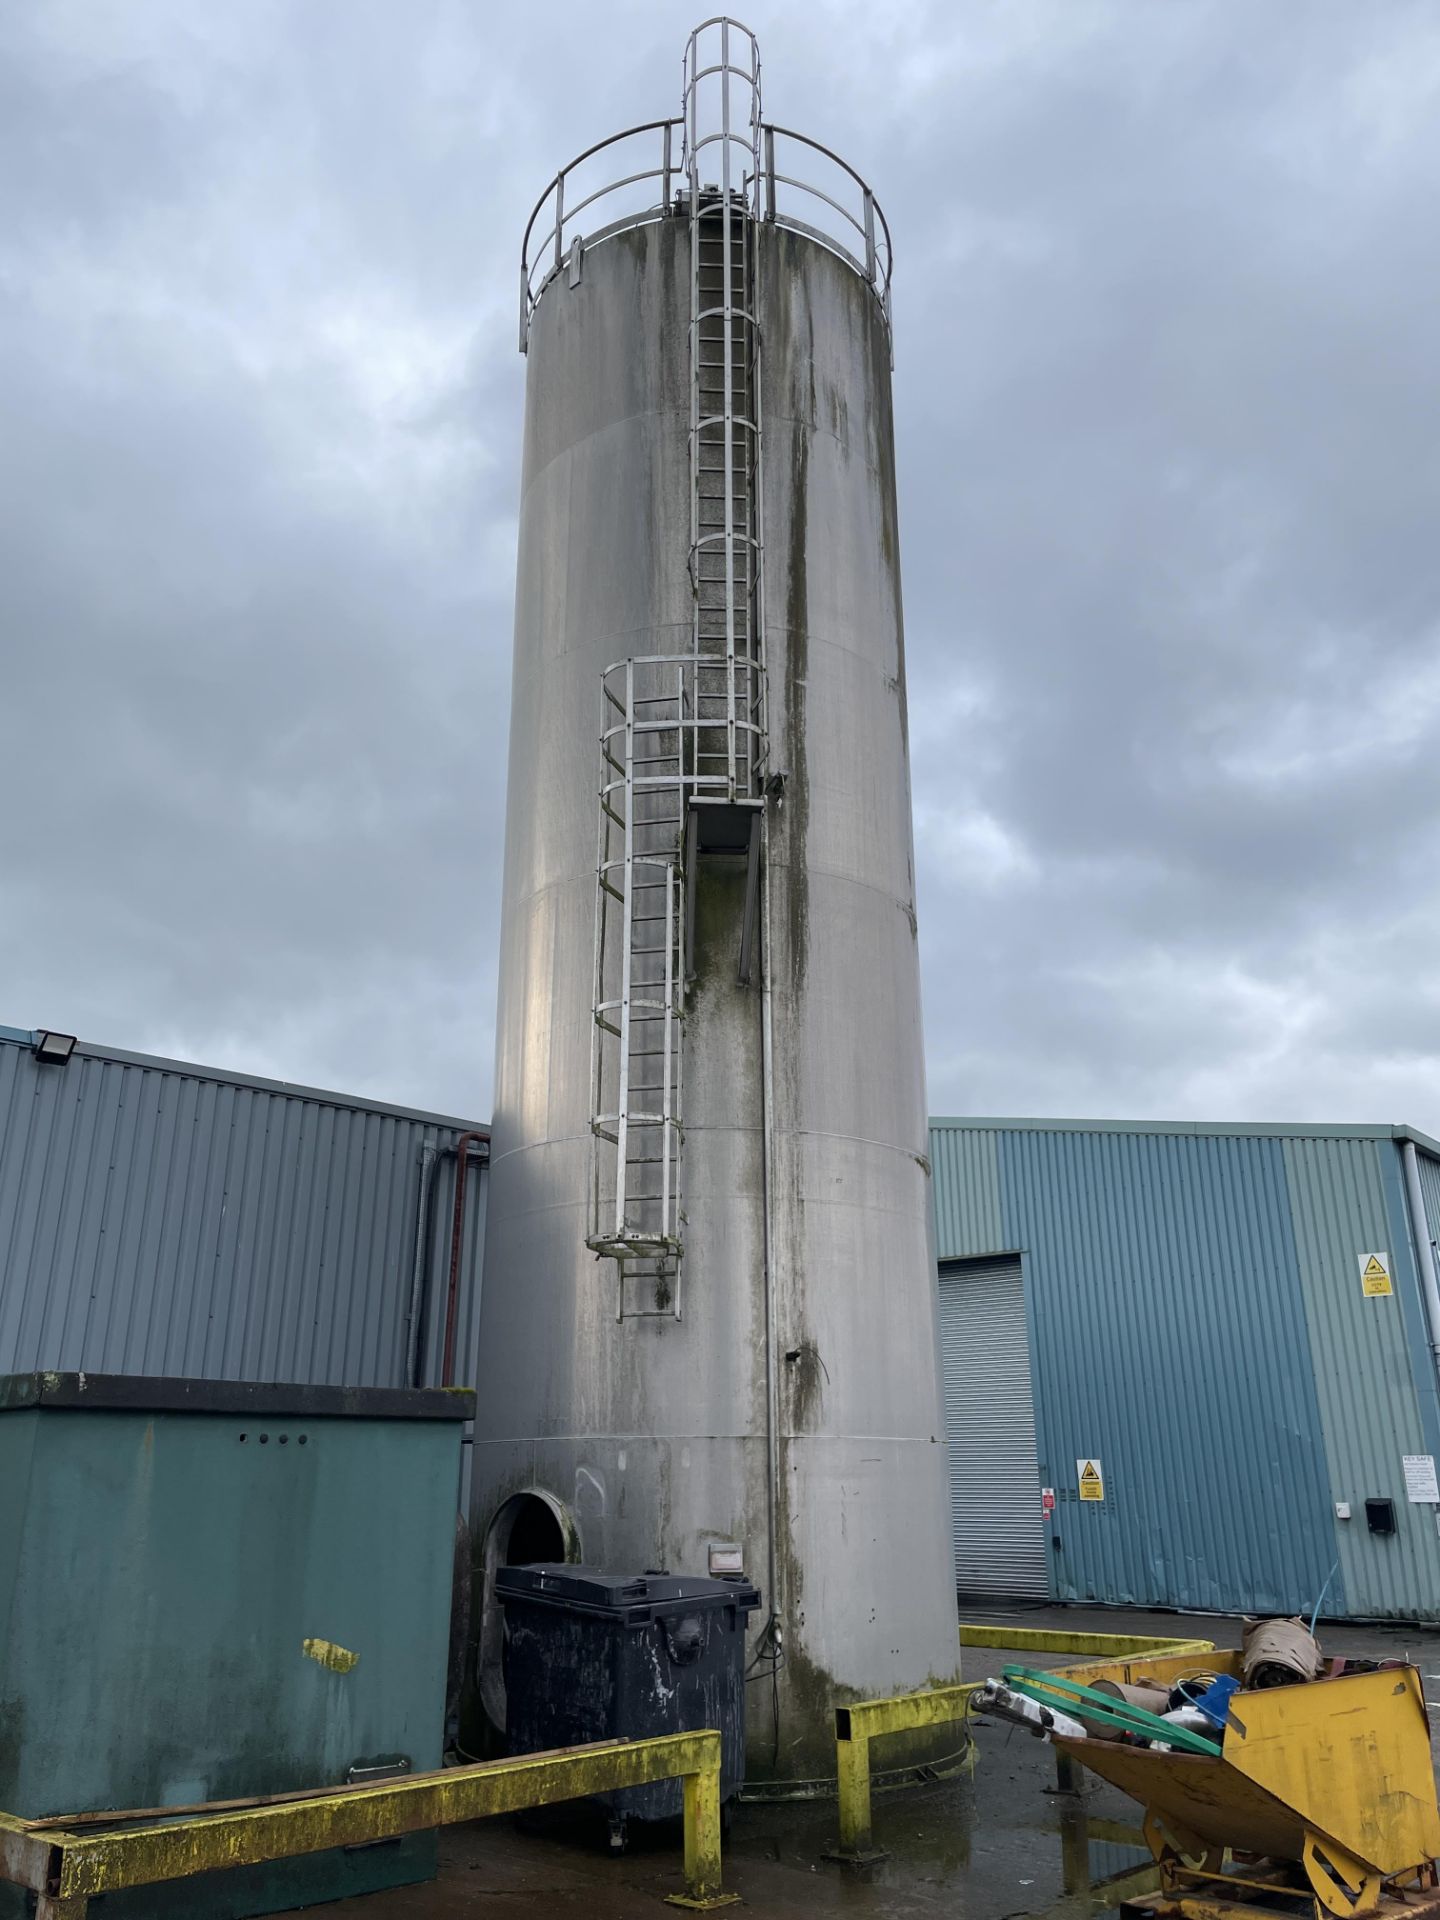 Braby Aluminium Silo, serial no. 004561, year of manufacture 1996, with access ladders, dust unit, - Image 3 of 5